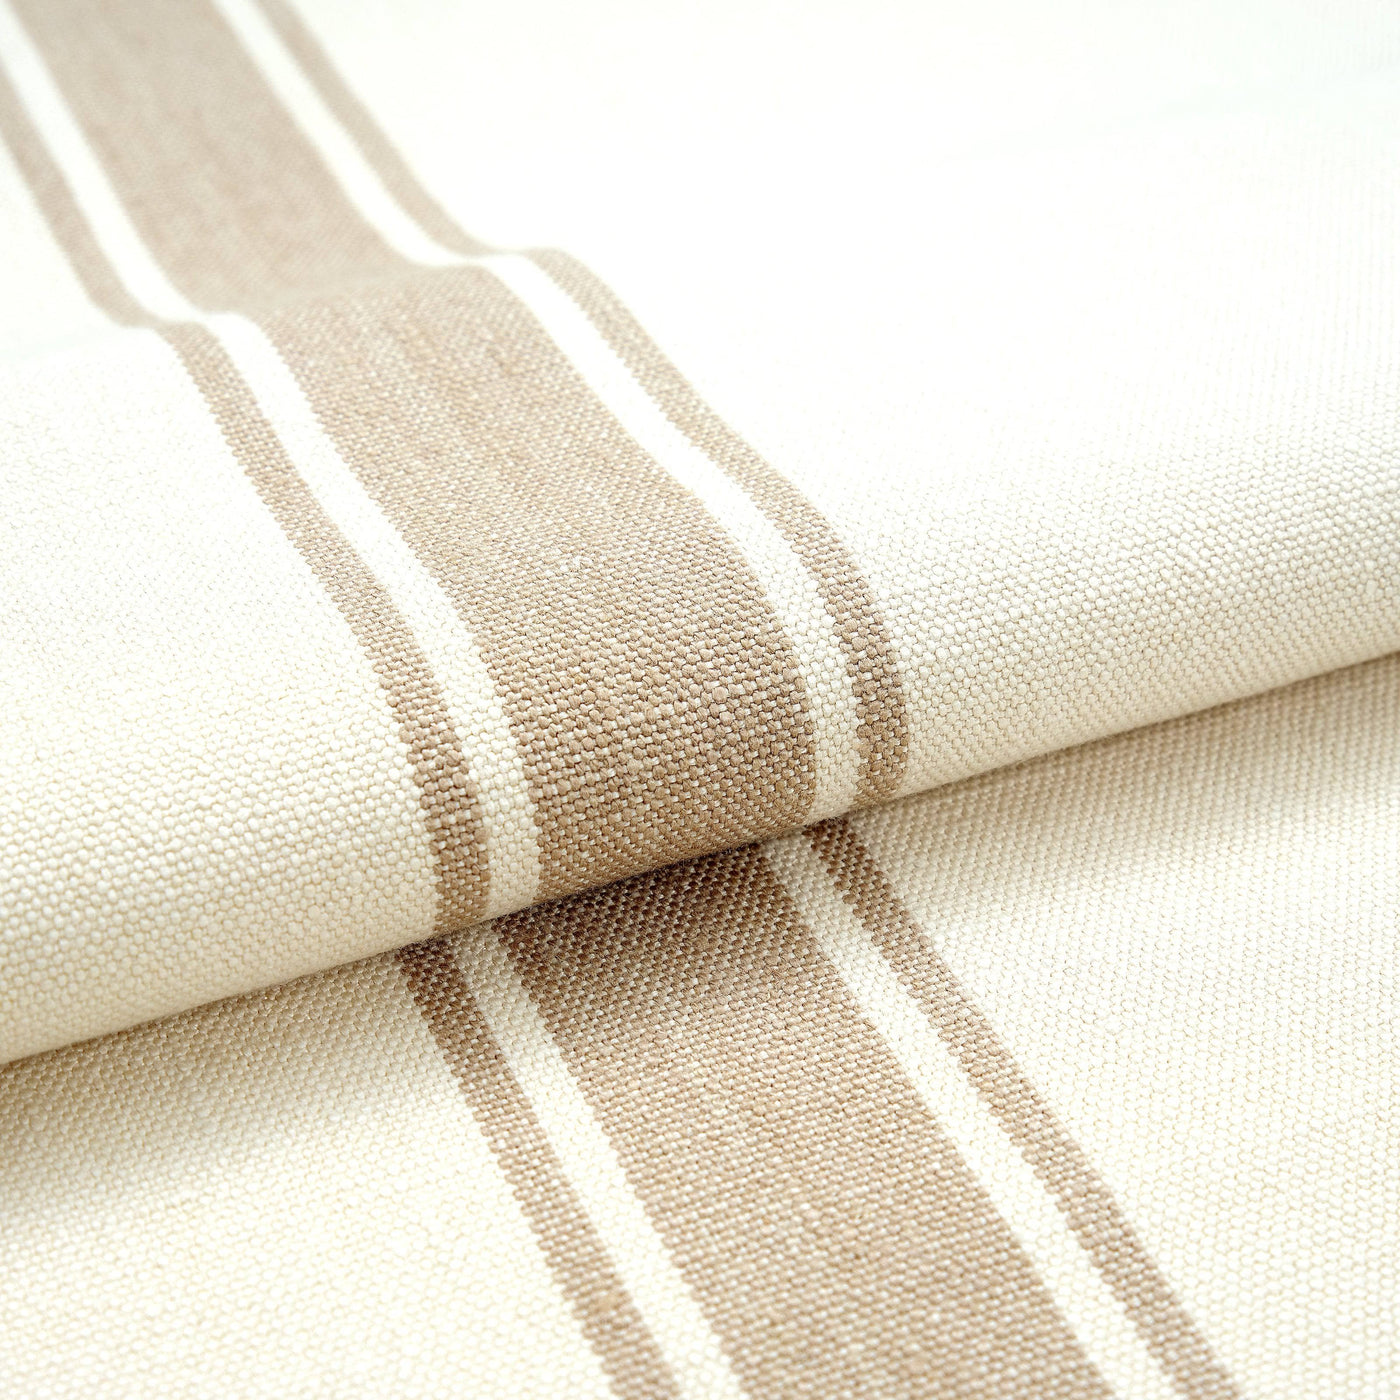 Mary Set of 2 Striped Placemats, Natural - Beige, 35x46 cm 3